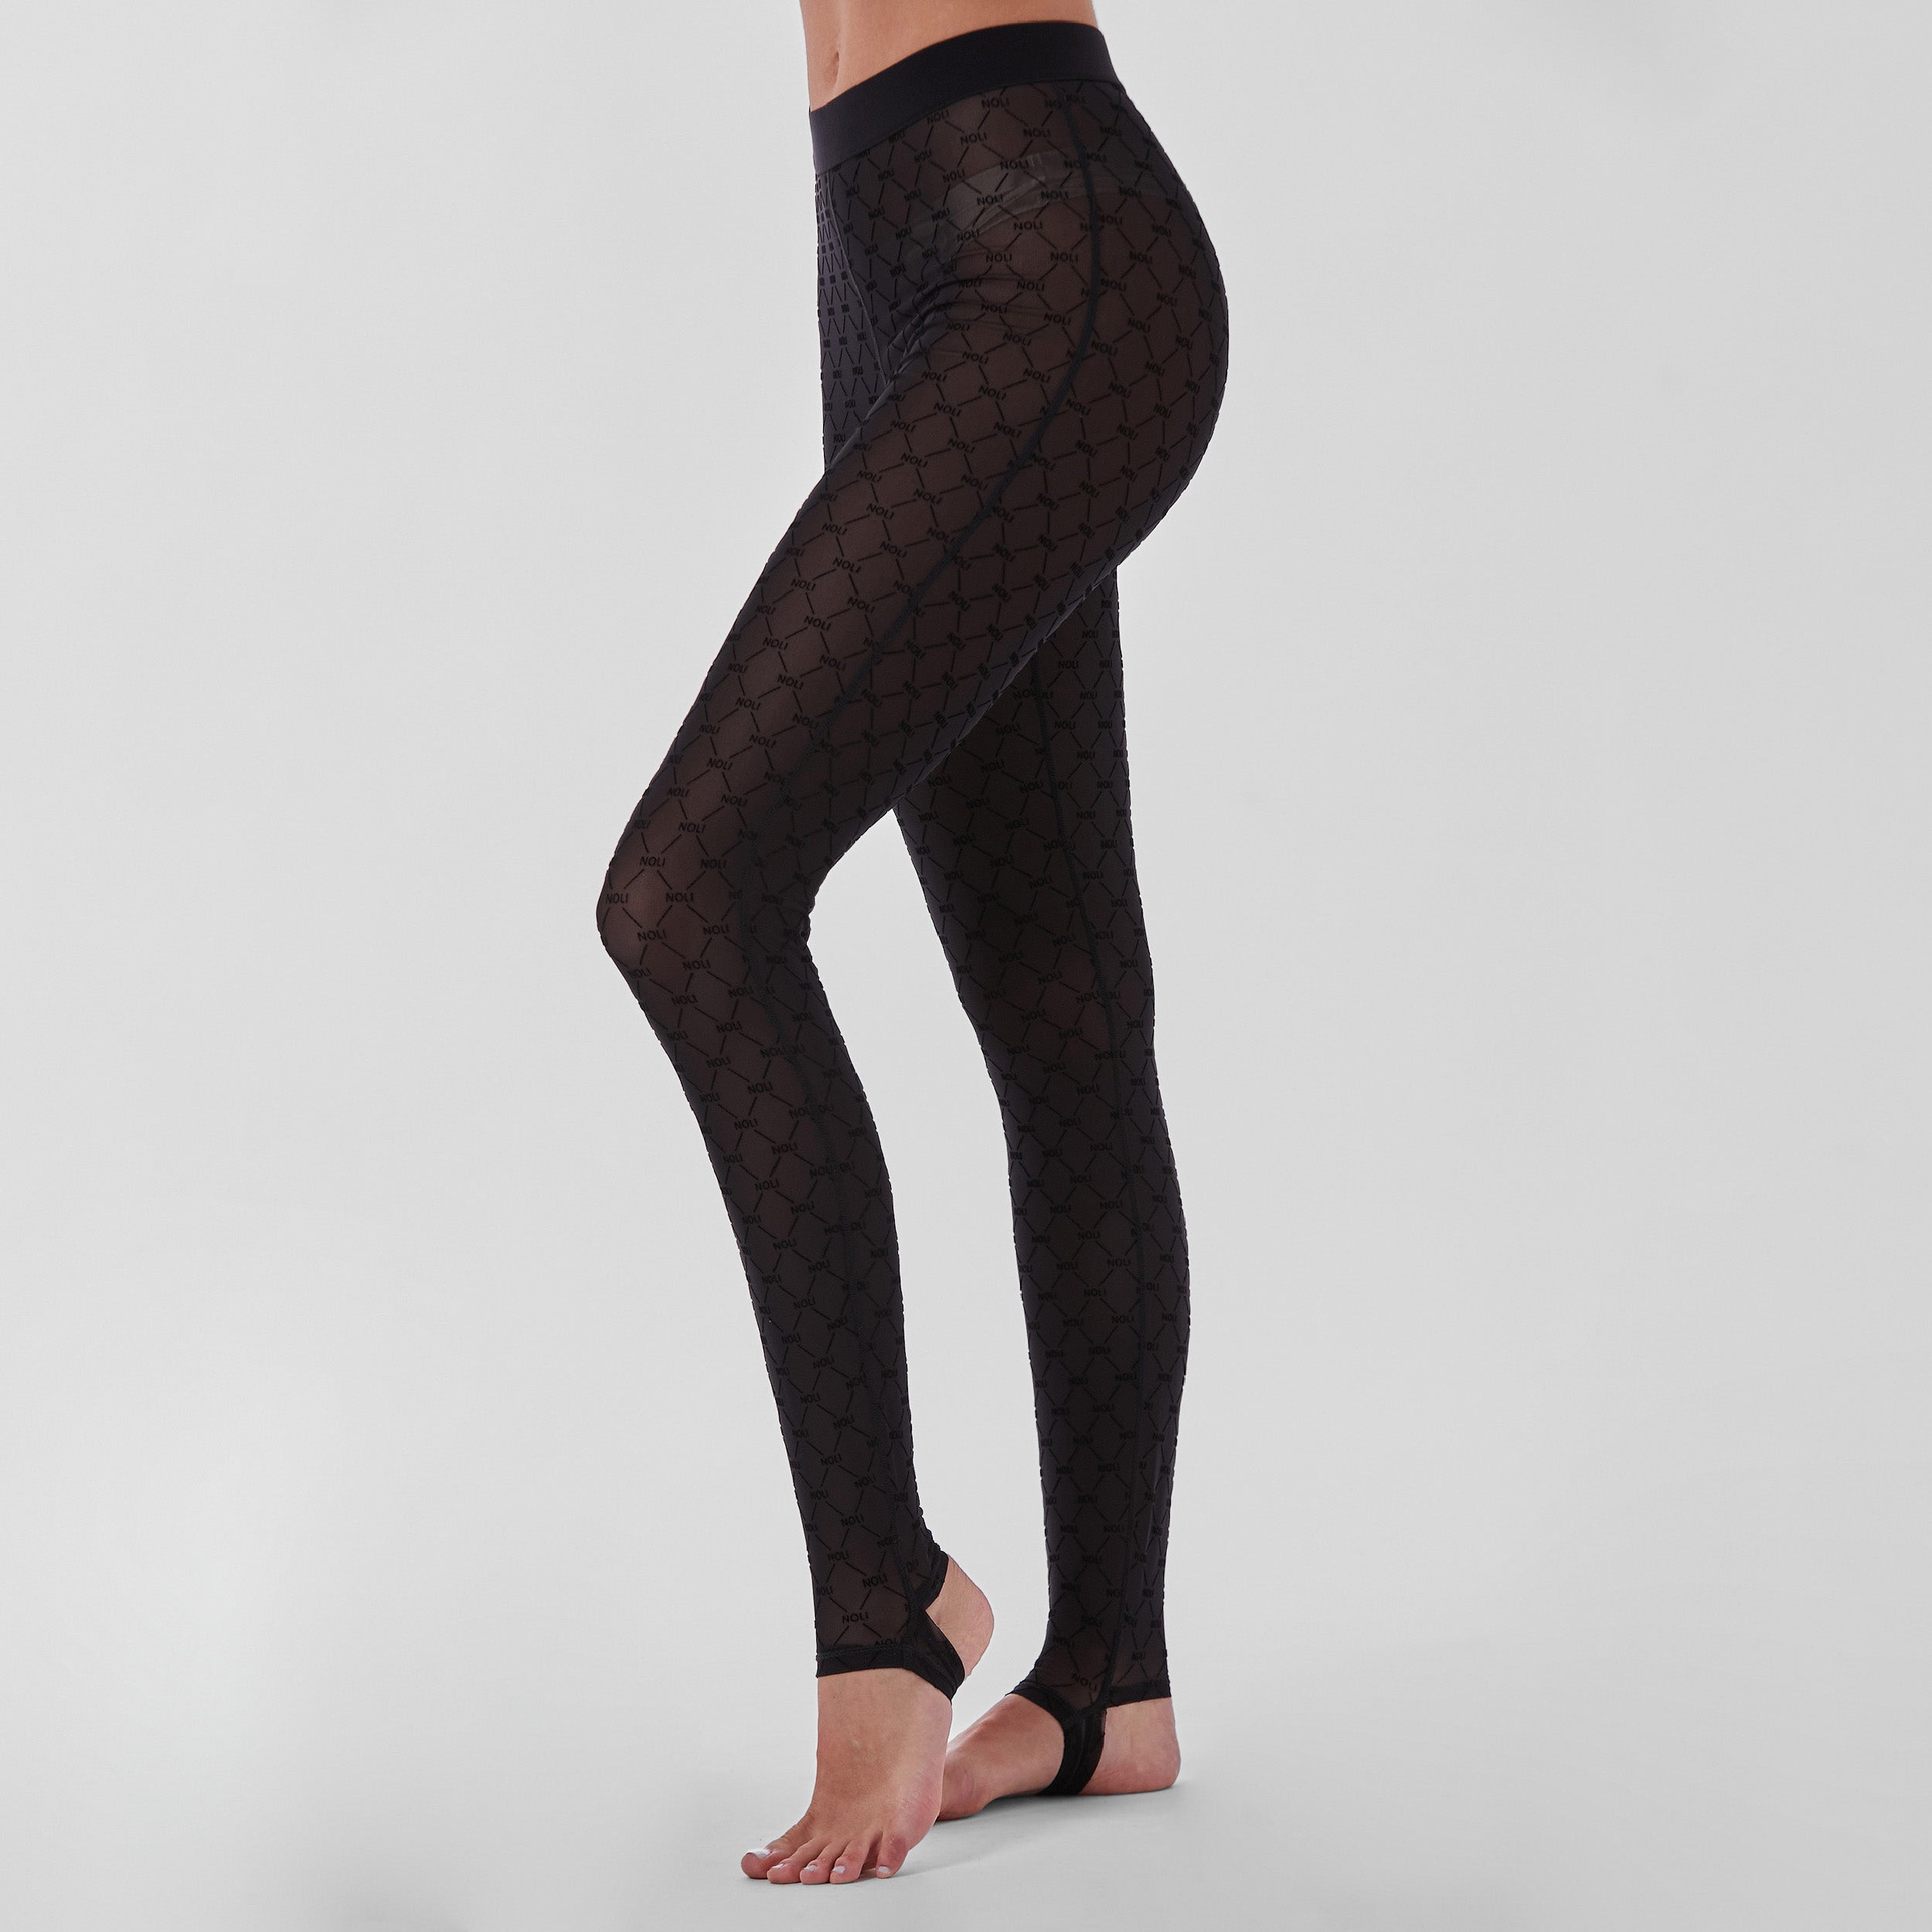 Side view of woman wearing tights featuring ultra-soft and comfortable NOLI monogram mesh, slip this four-way stretch mesh